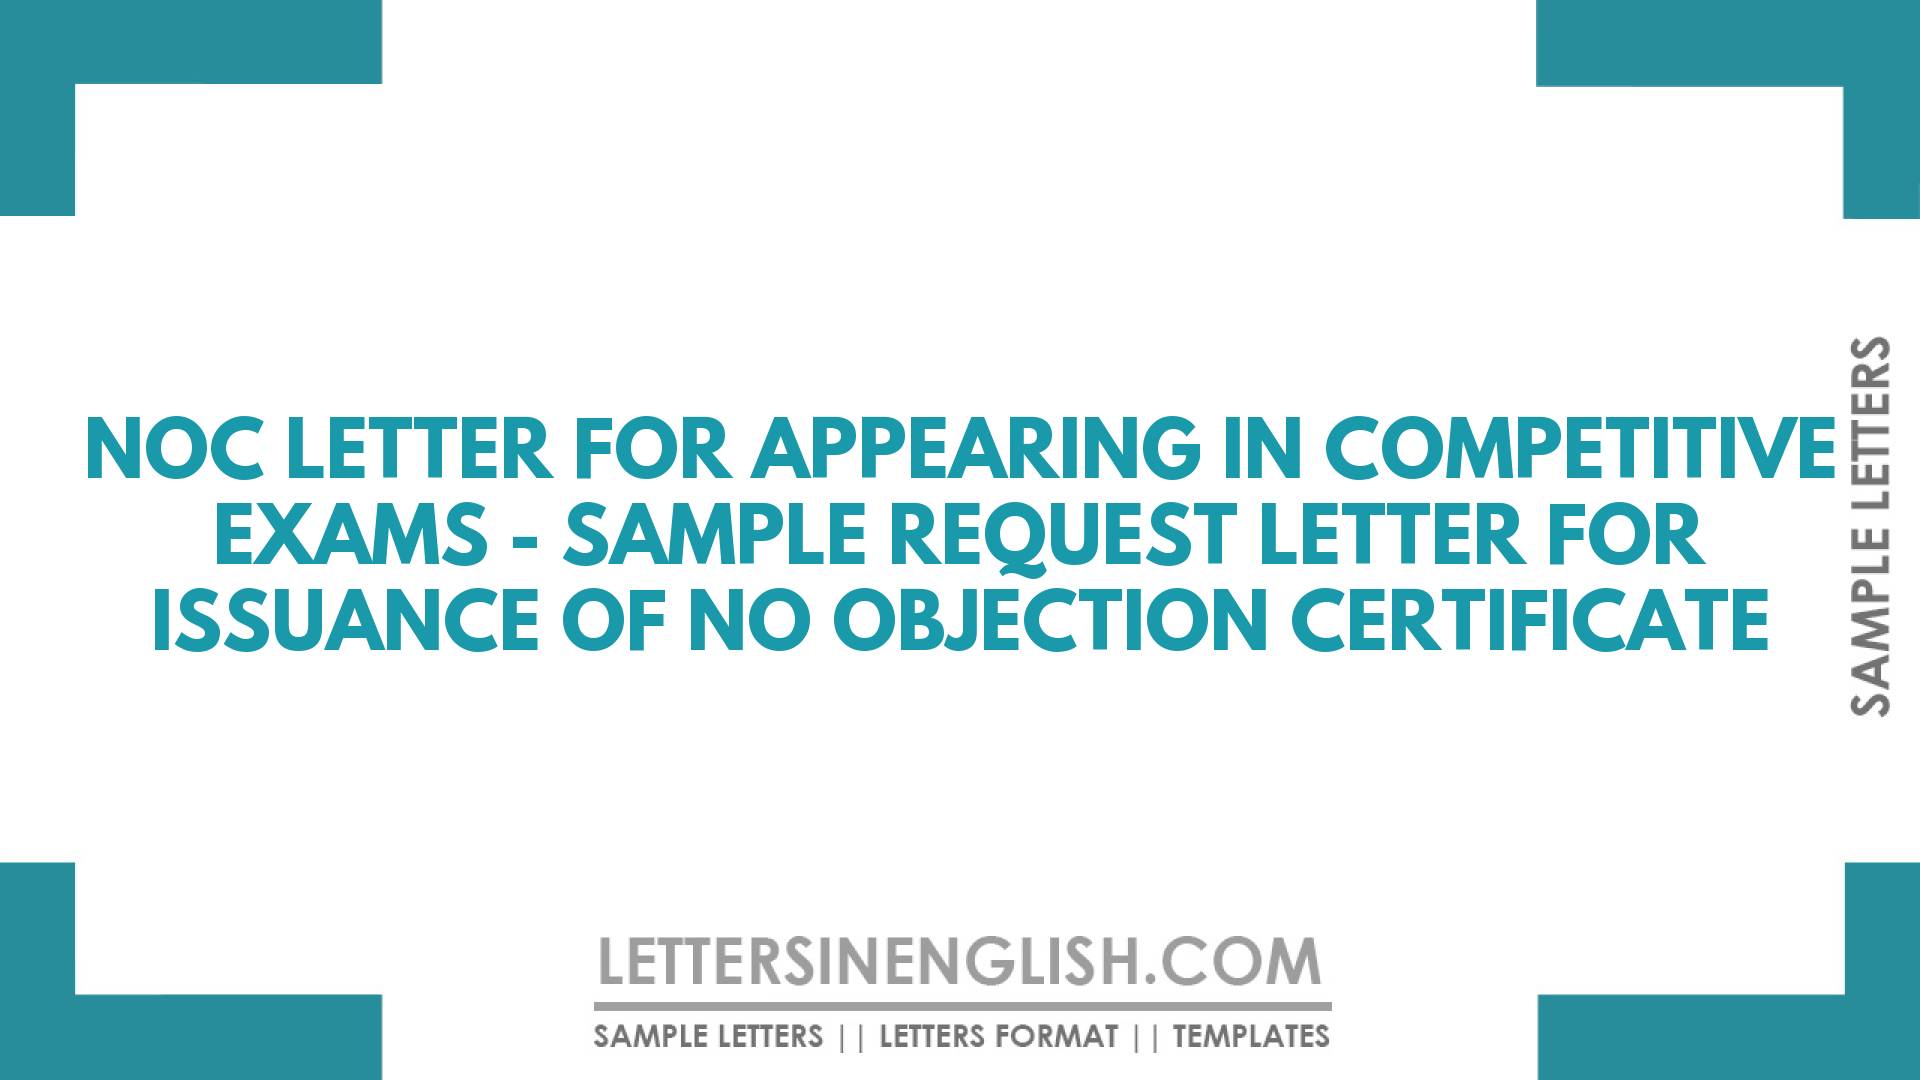 NOC Letter for Appearing in Competitive Exams – Sample Request Letter for Issuance of No Objection Certificate